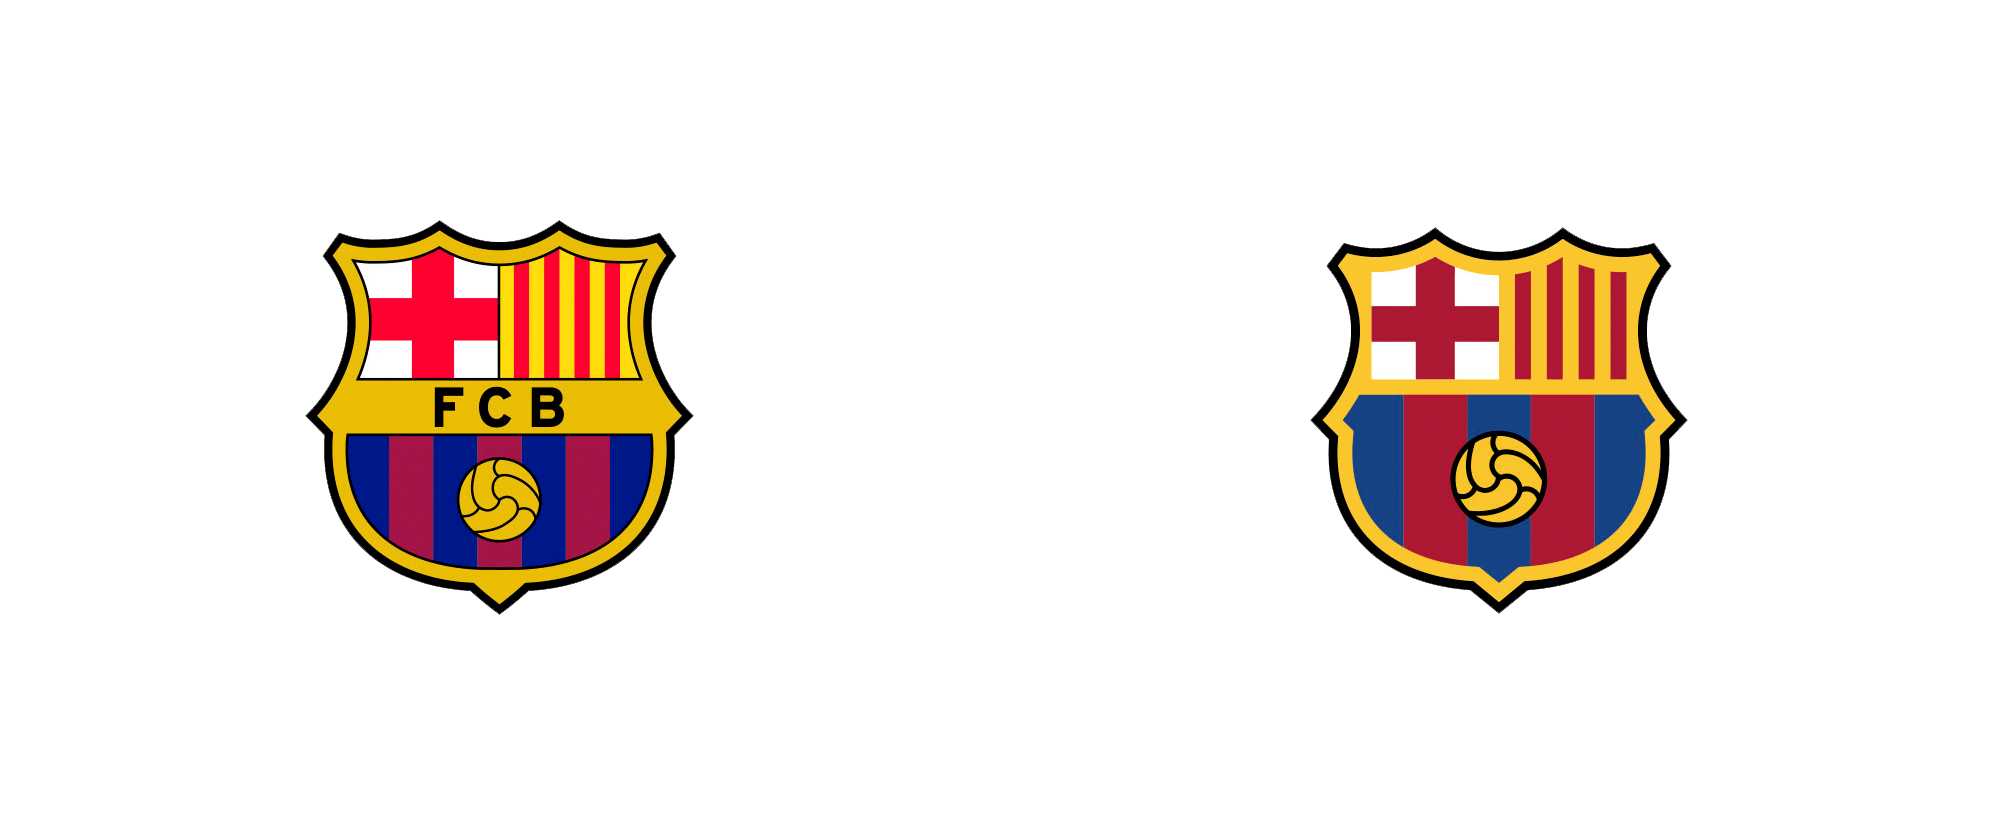 White with Red Cross Logistics Firm Logo - Brand New: New Crest and Identity for FC Barcelona